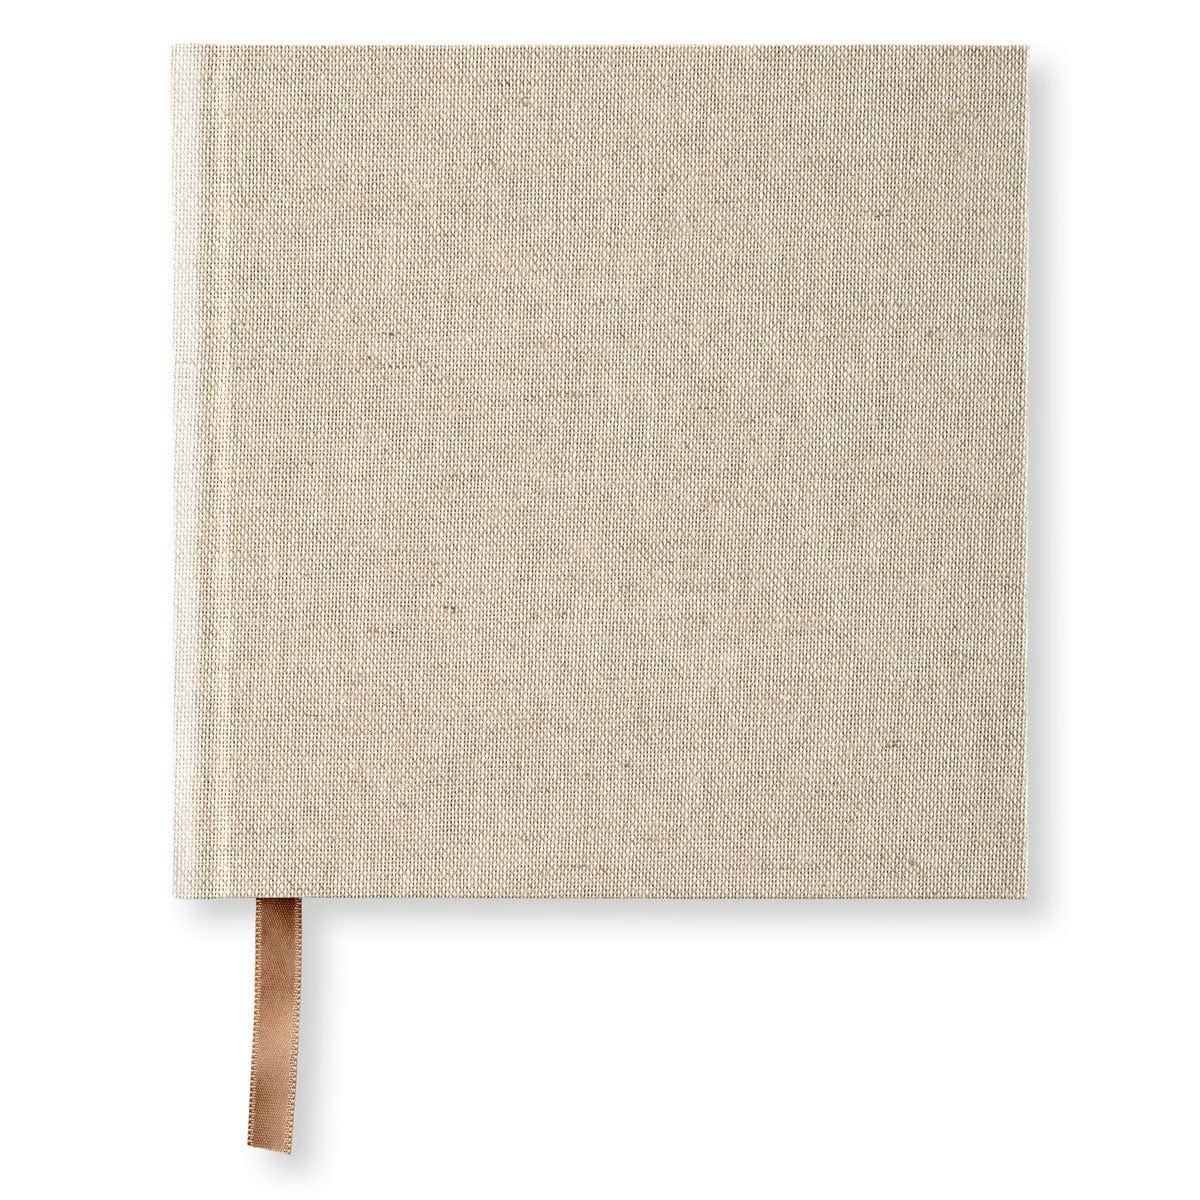 PaperStyle PS BLANK BOOK 185 x 185 Rough Linen